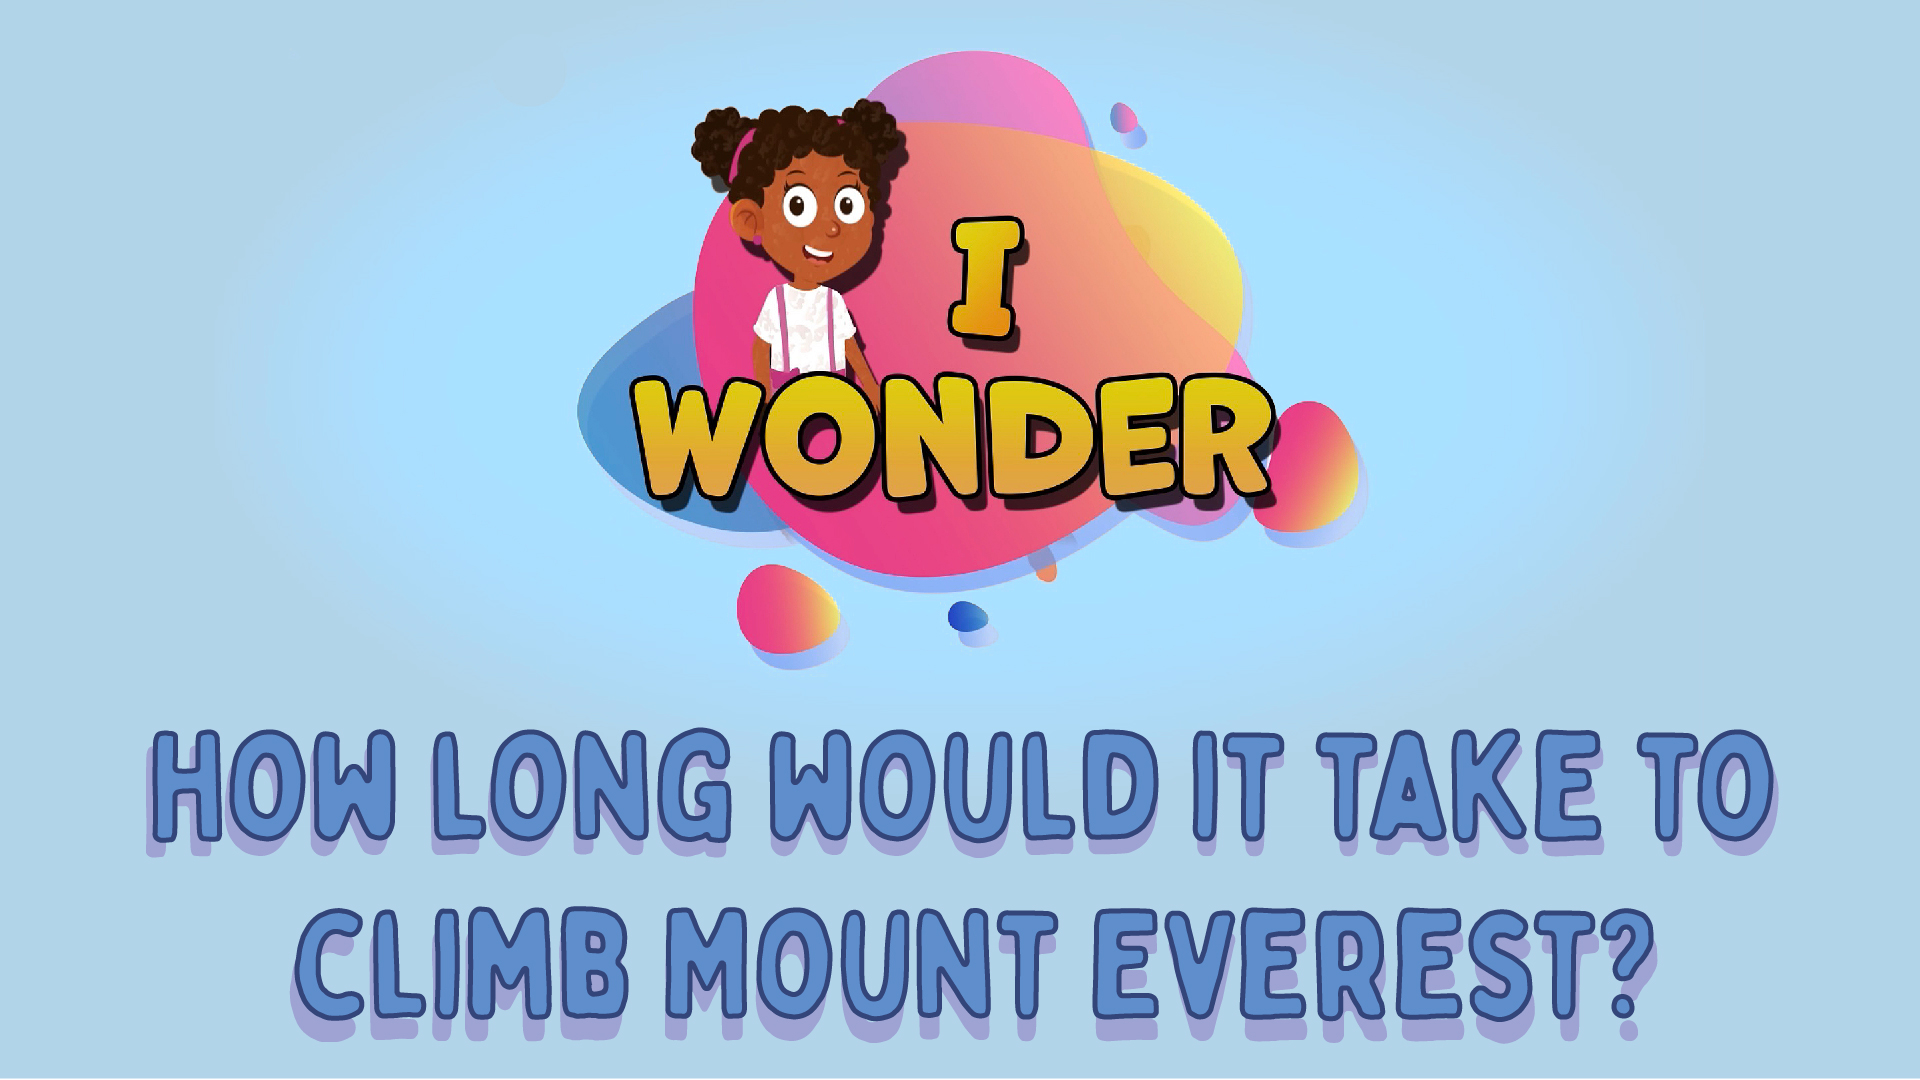 How Long Would It Take To Climb Mount Everest?